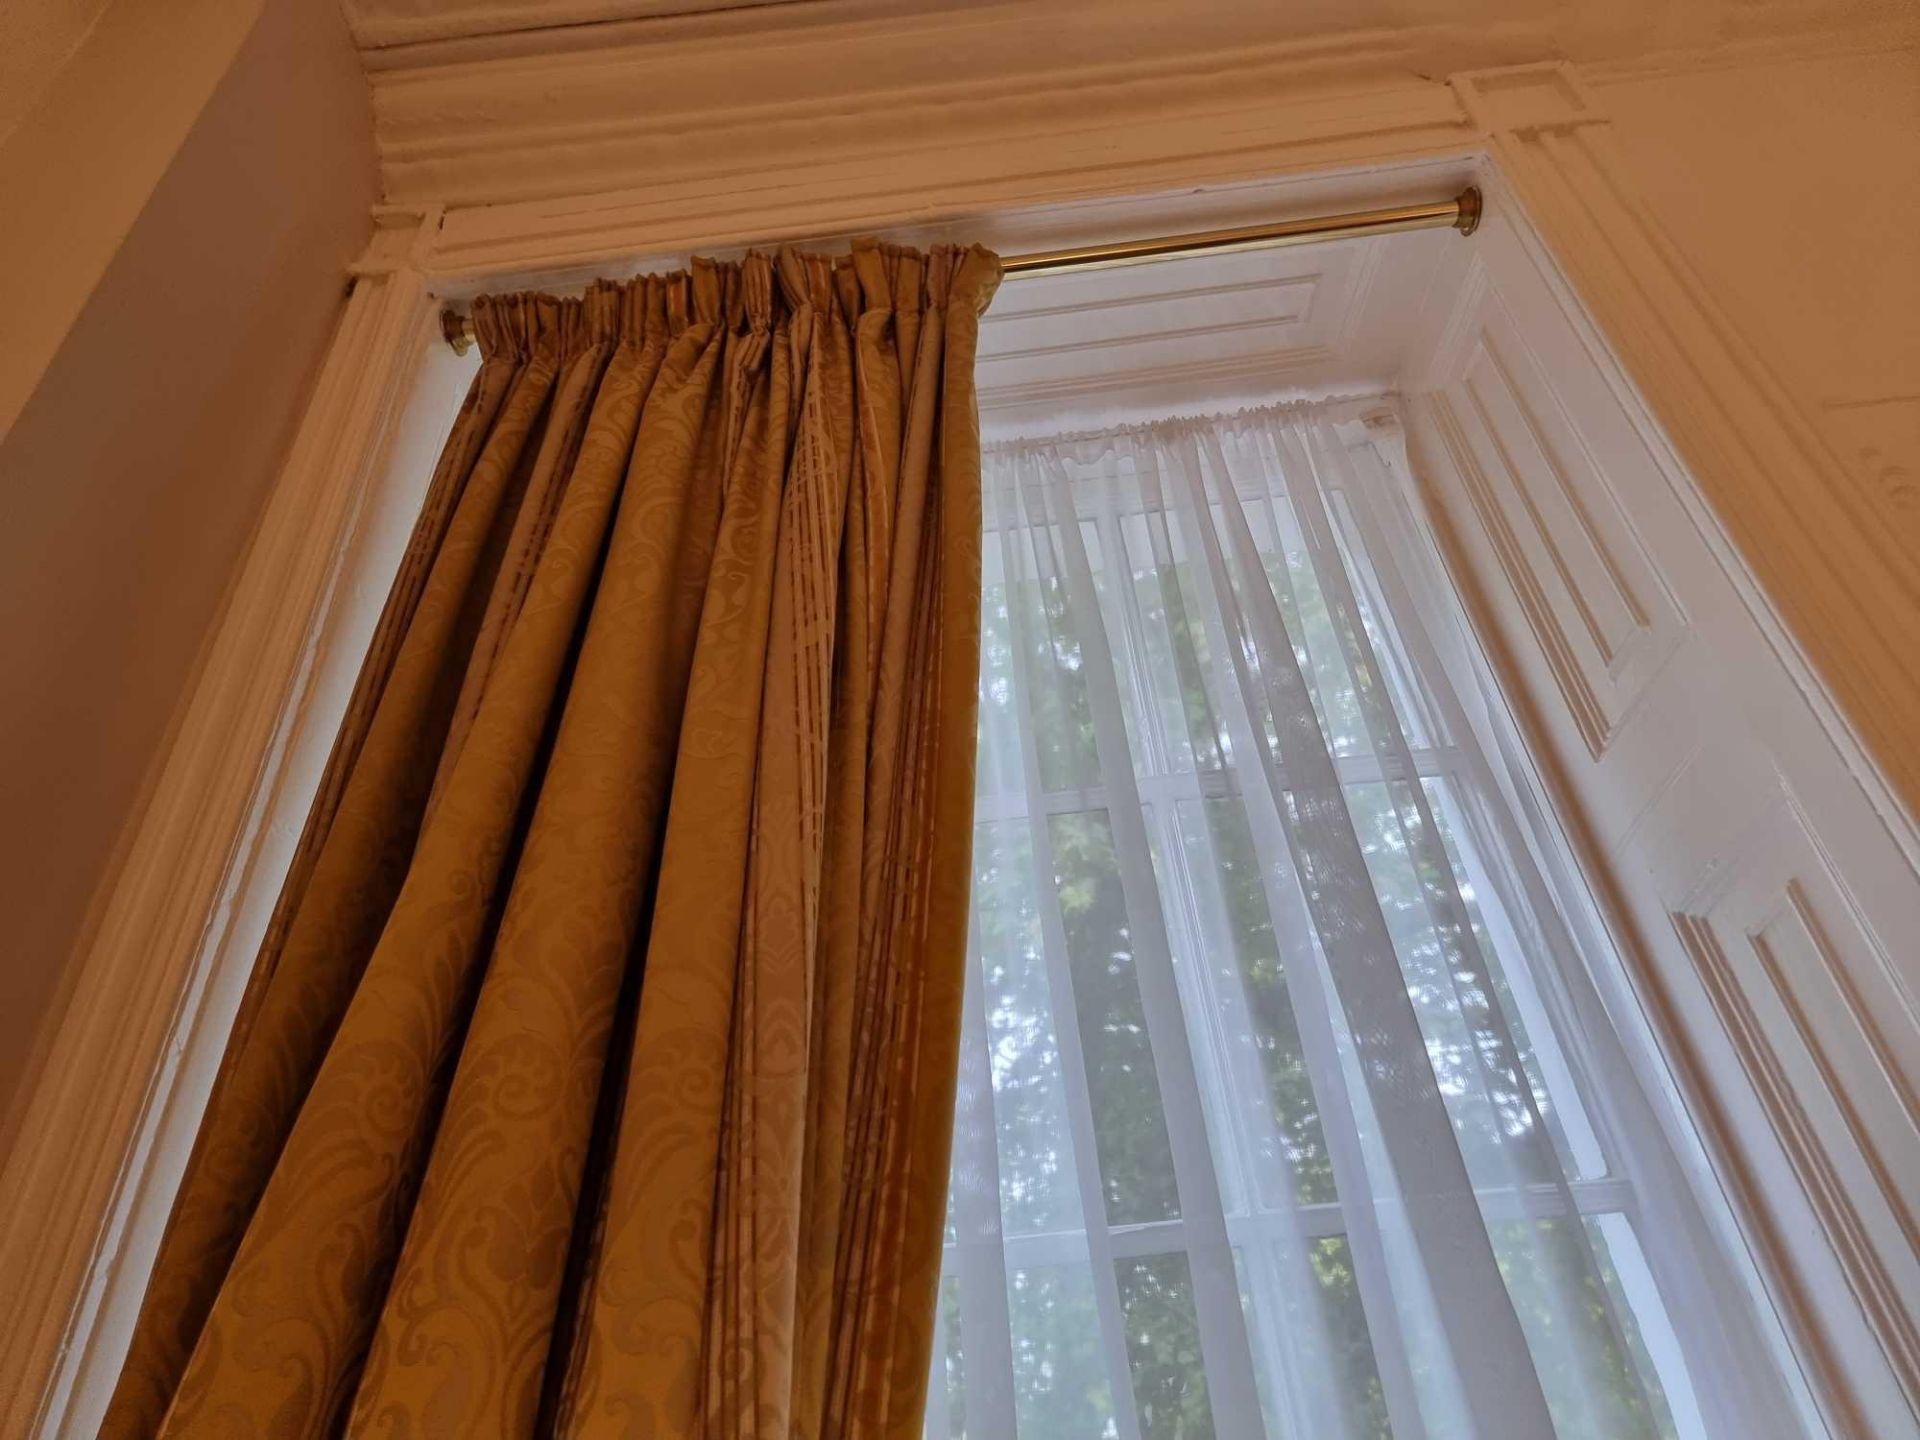 A Single Panel Window Drape Fully Lined Curtain Gold Pattern Throughout Mounted On Brass Pole Span - Bild 3 aus 4